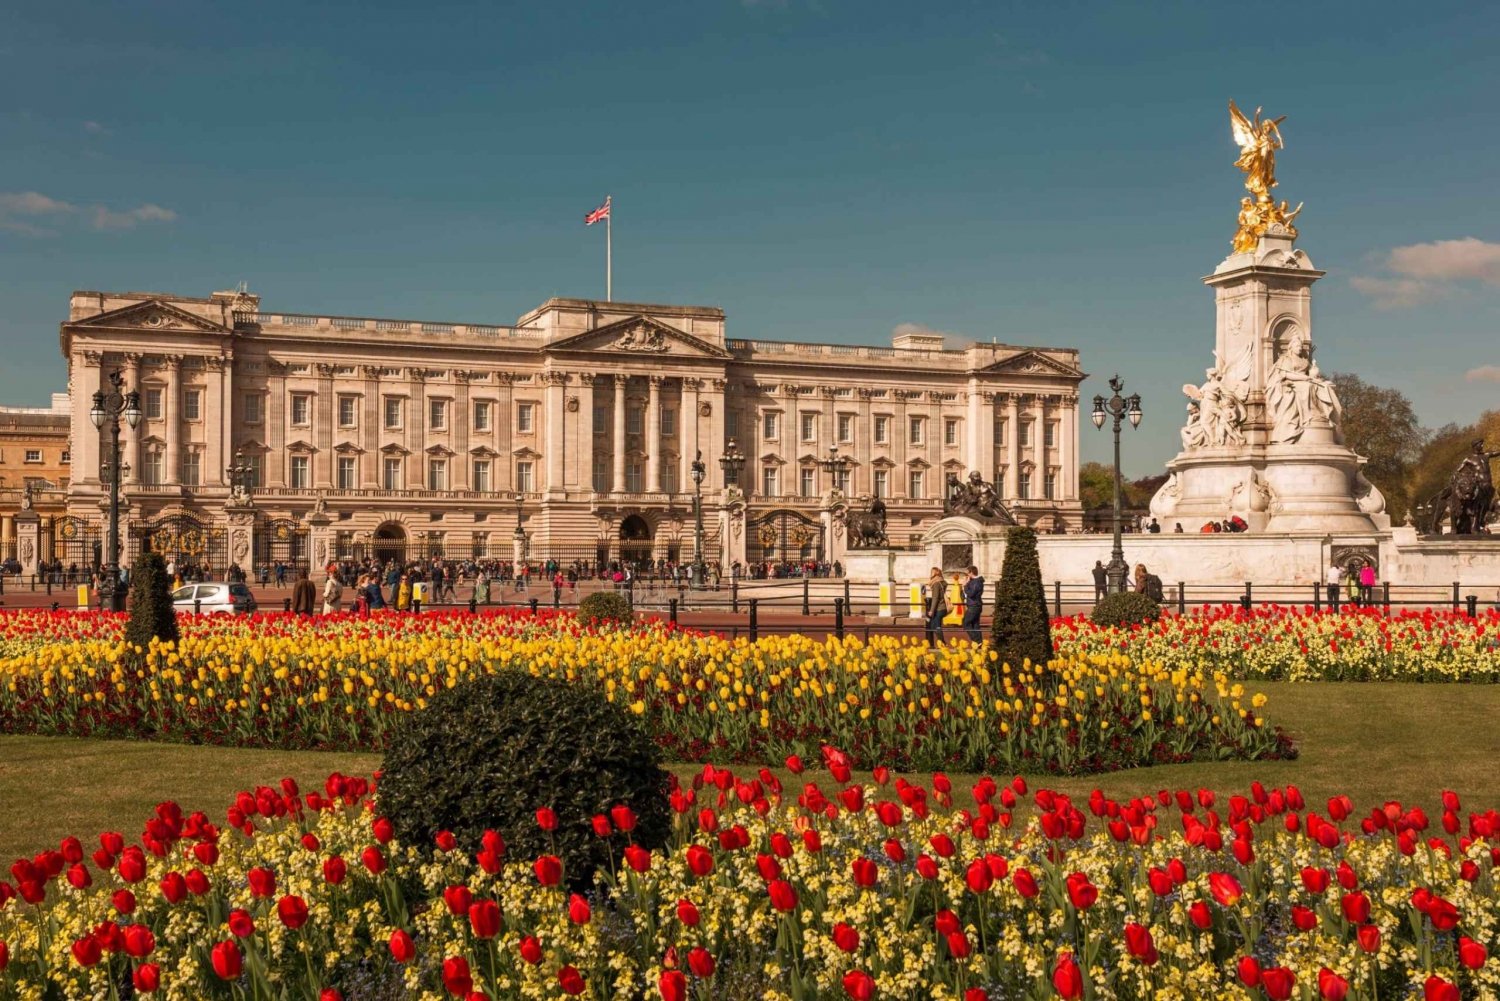 London: Selvguidet Mystery Tour ved Buckingham Palace (ENG)